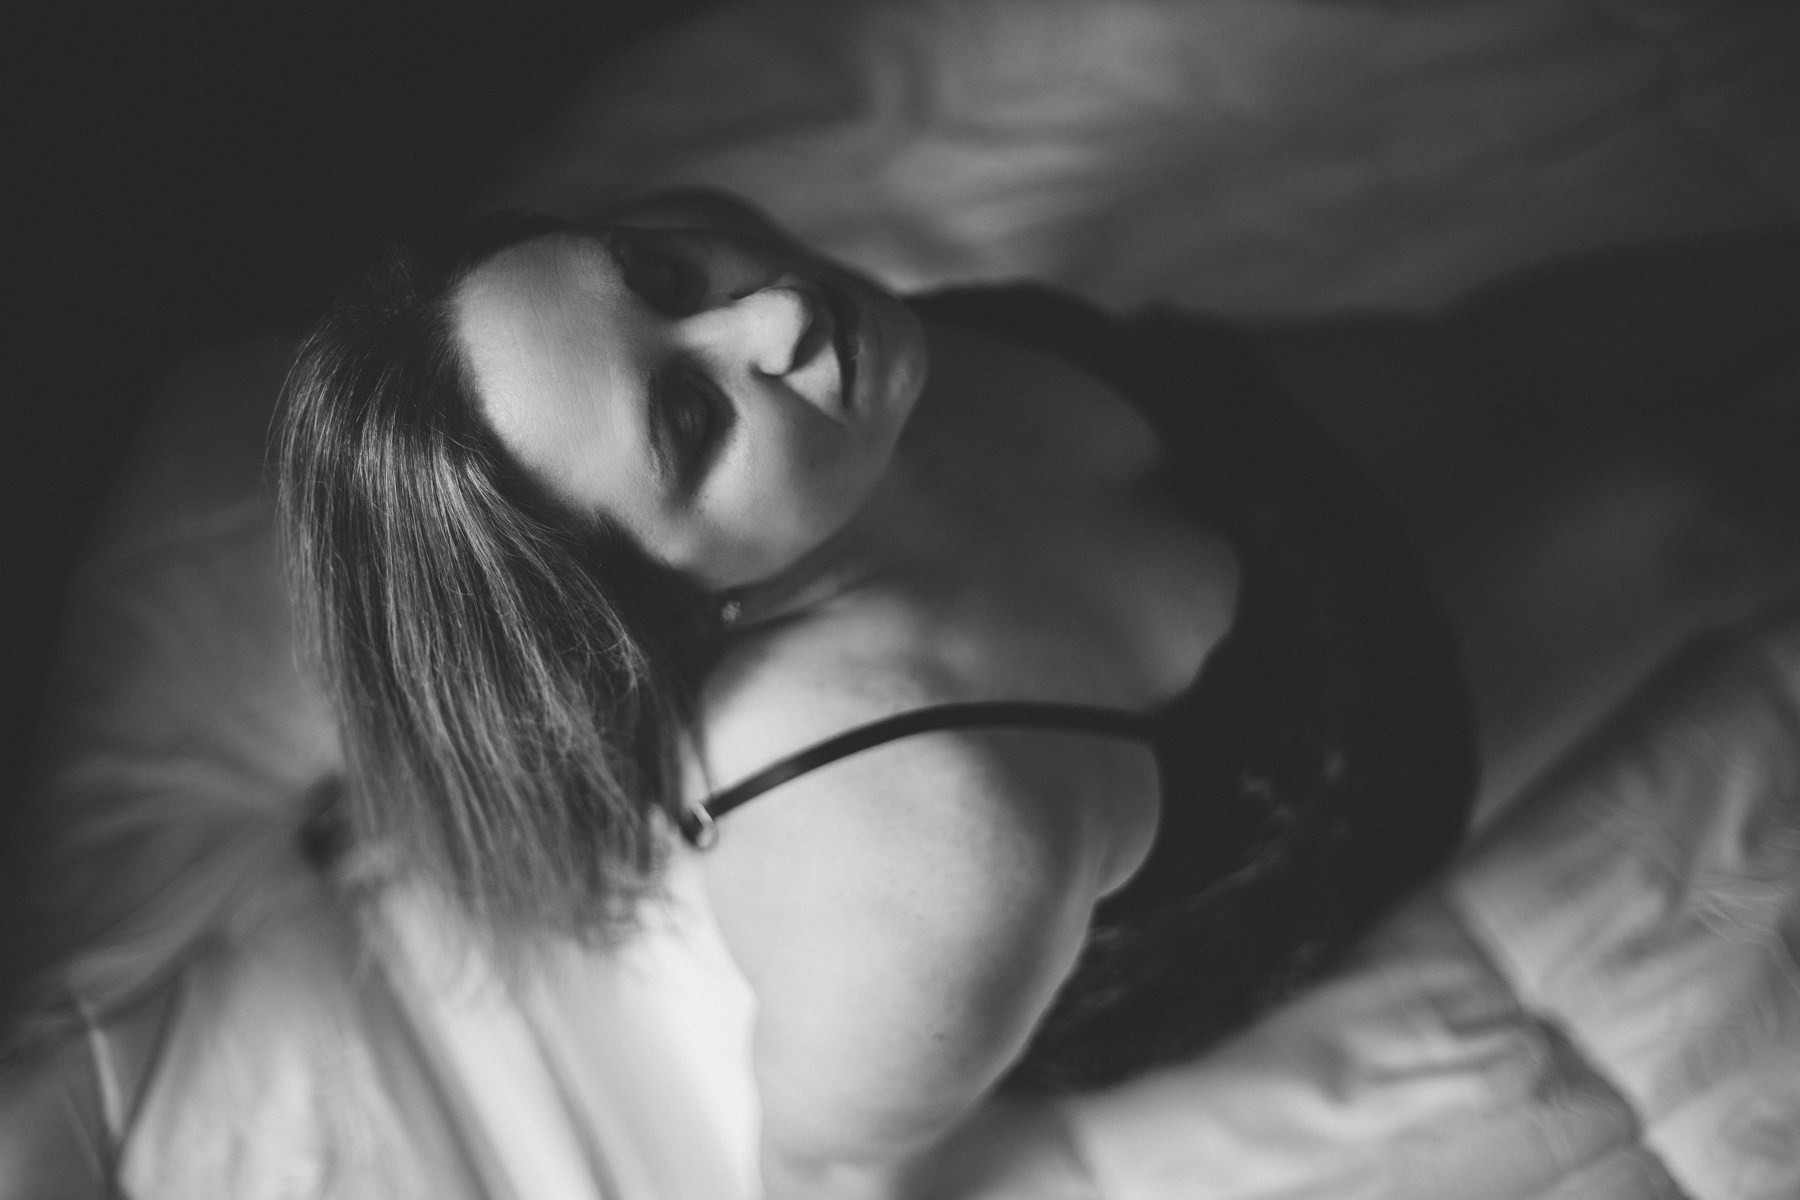 Black and white boudoir photo of a woman sitting back and hit tilted up